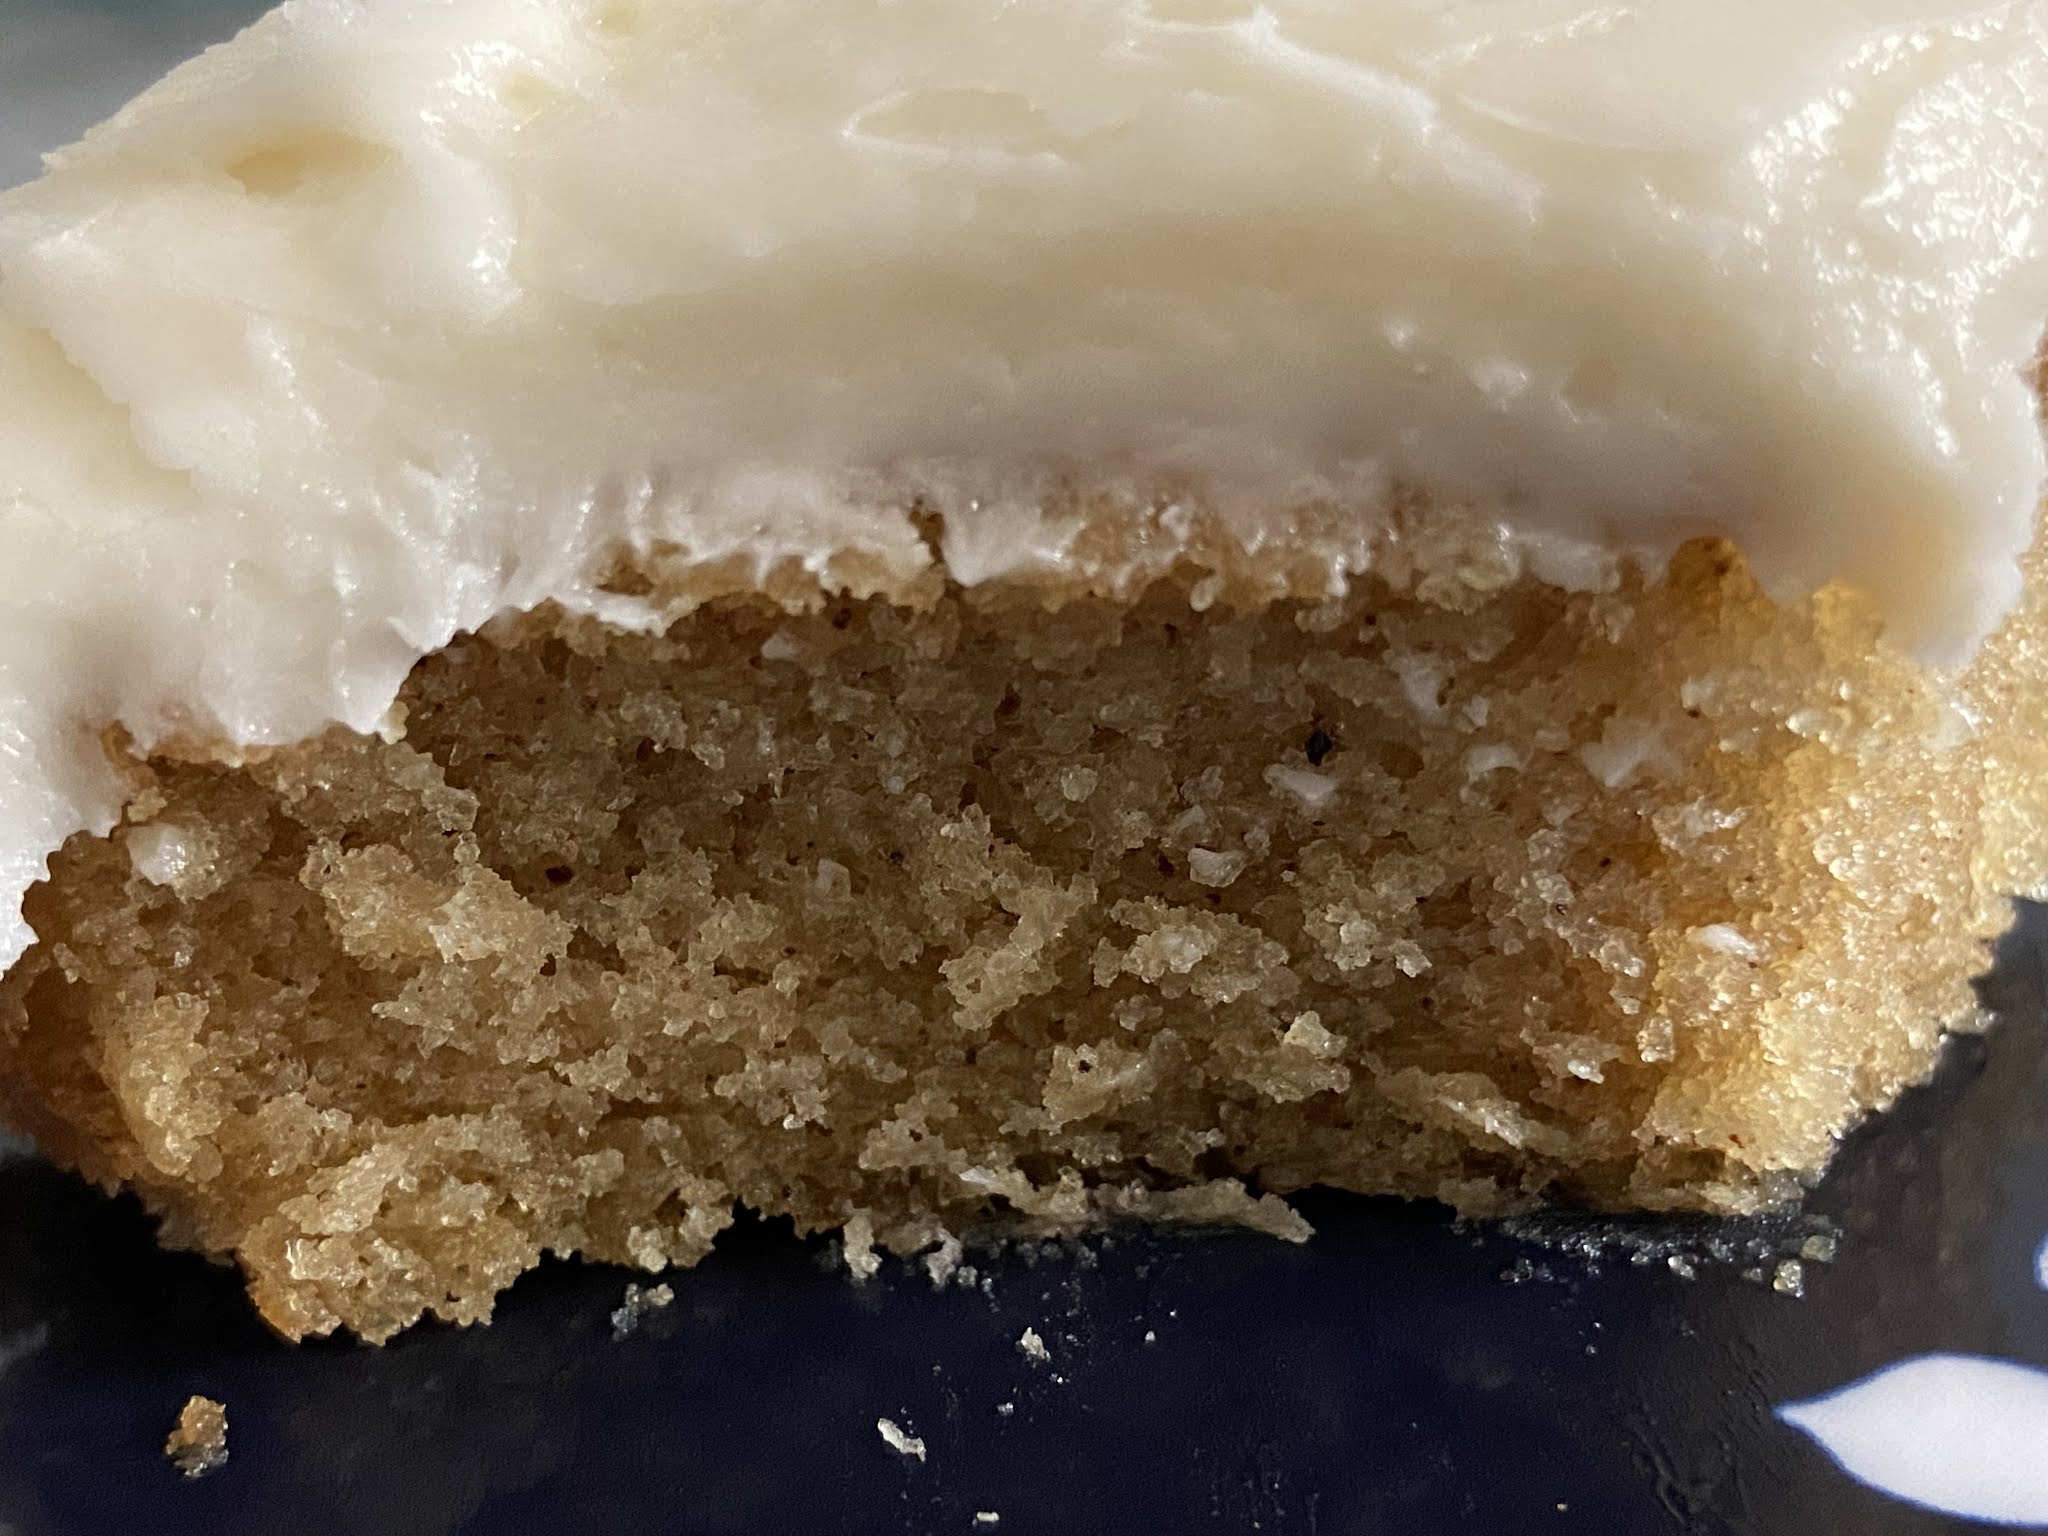 Vanilla Texas Sheet Cake Recipe with Brown Butter Icing